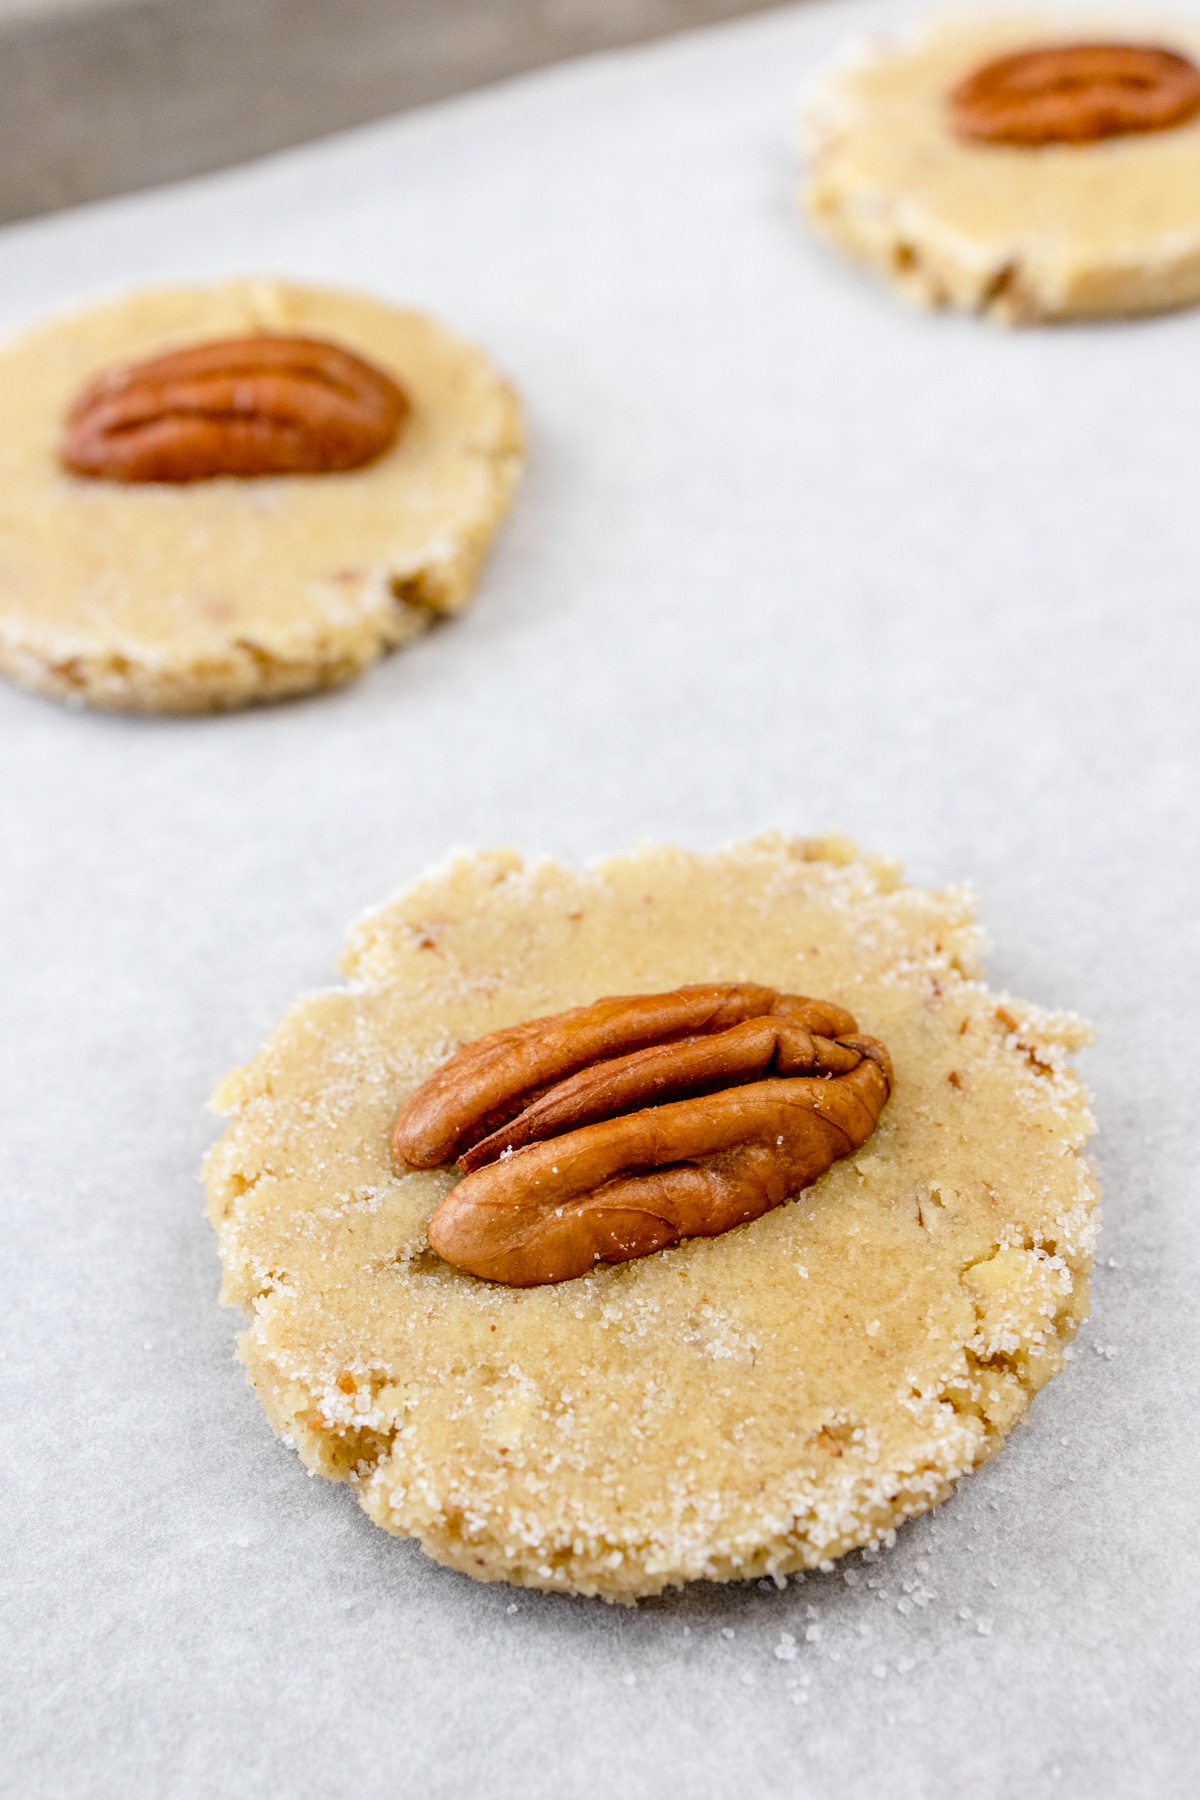 Close up of unbaked Pecan sandies cookies on parchment paper on a baking tray.